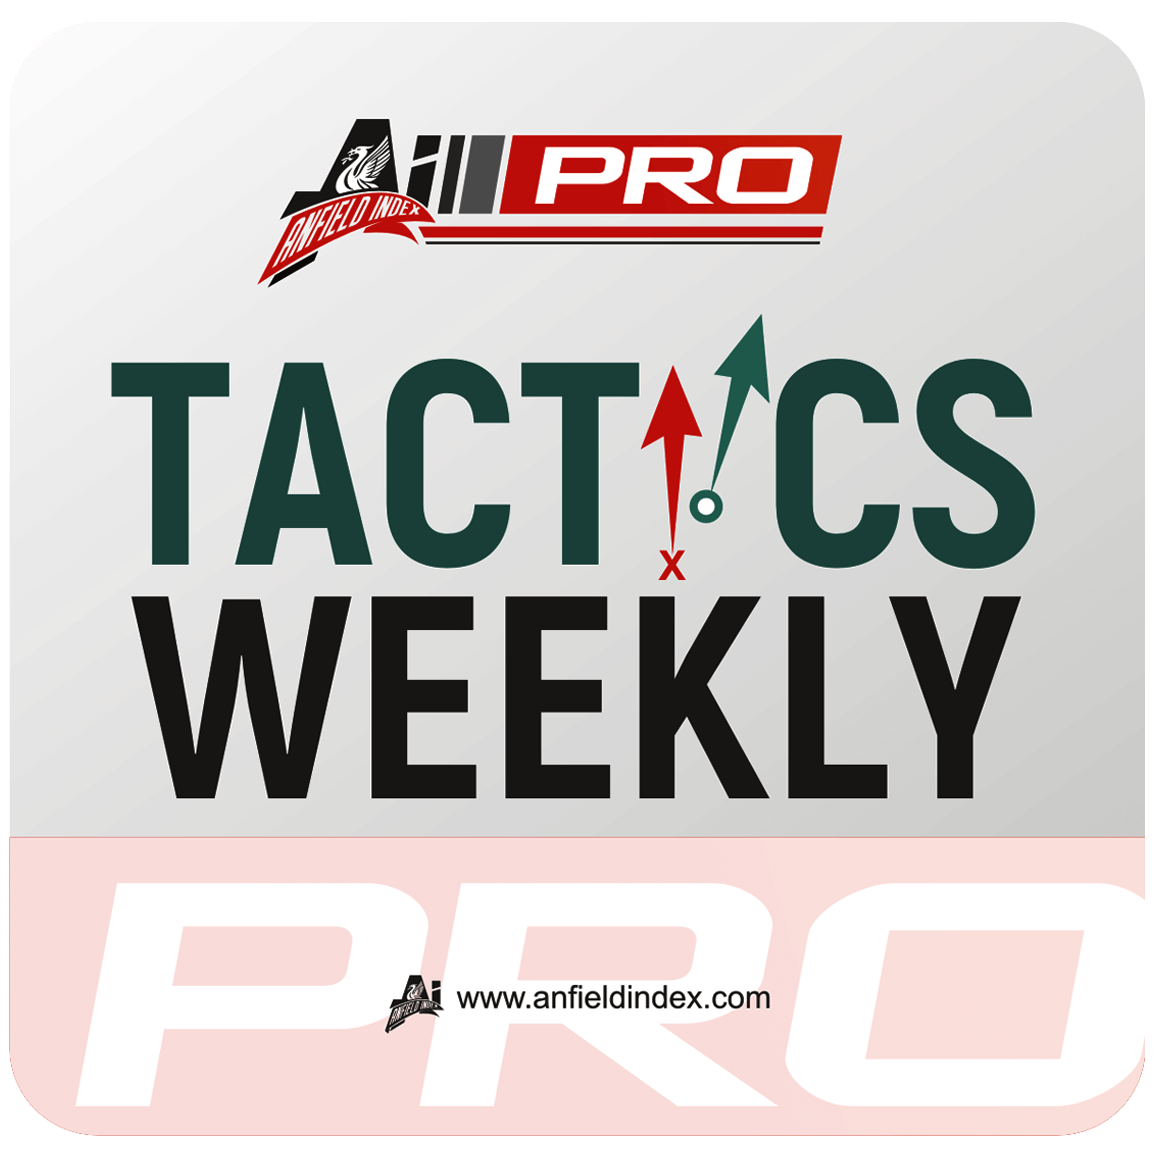 Tactics Weekly - Tactical Review of the Season